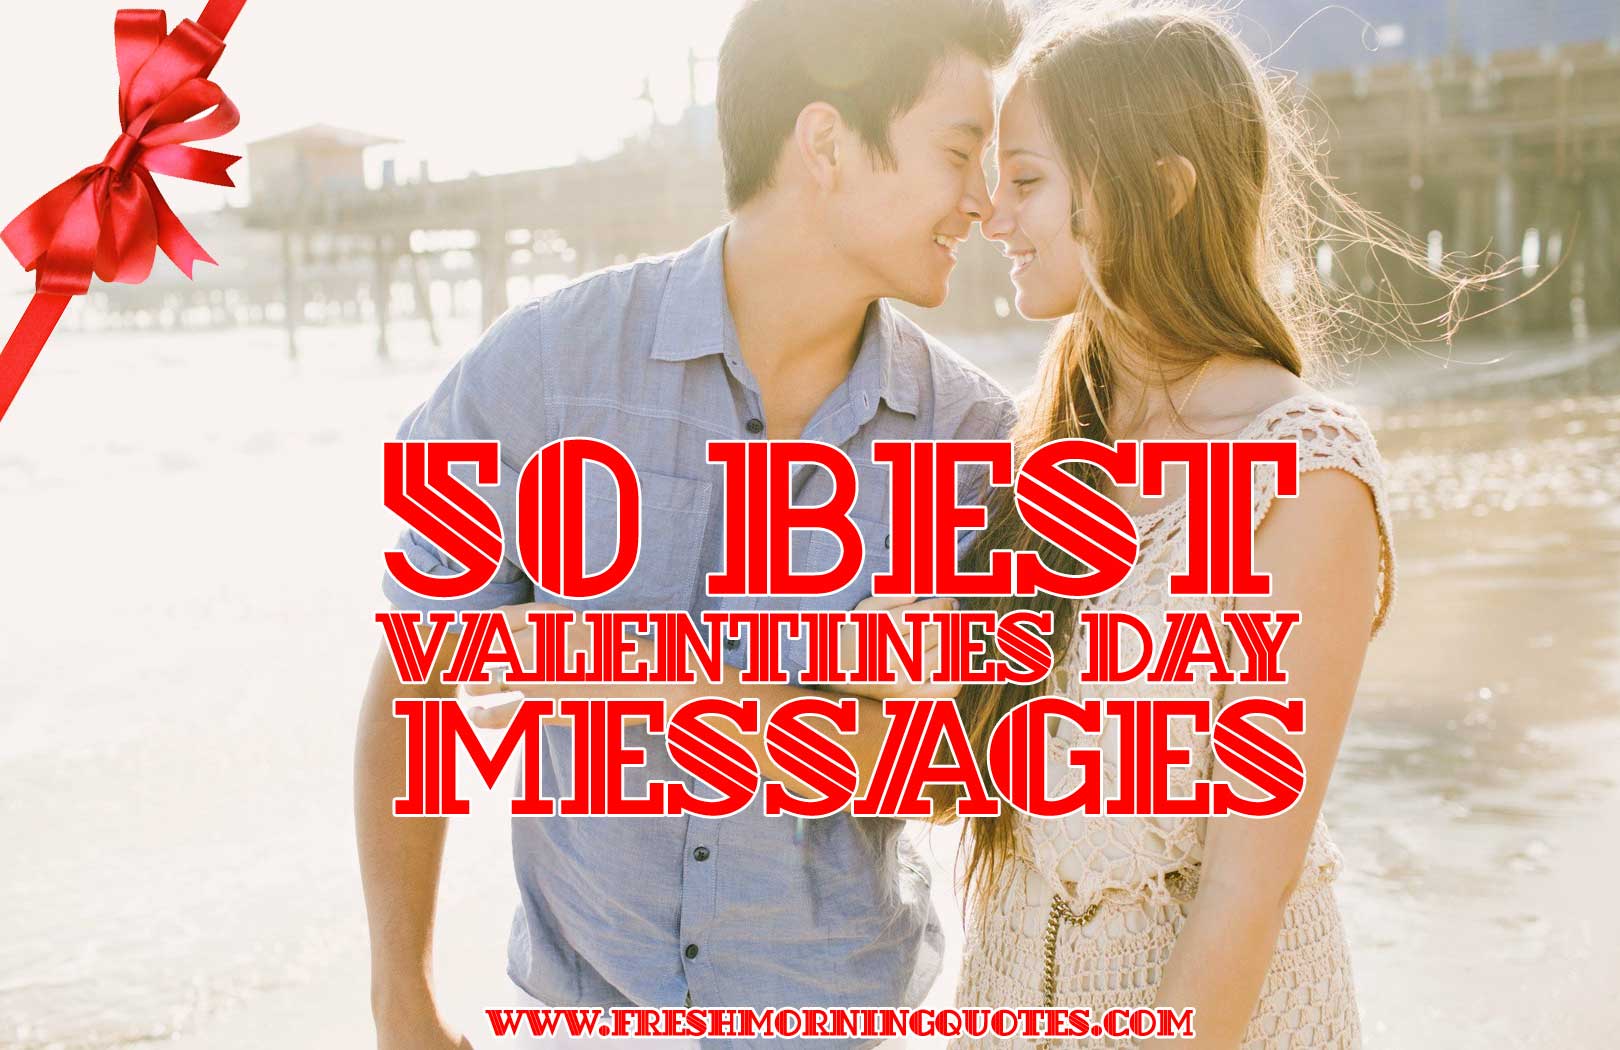 50 Best Valentines Day SMS messages - Freshmorningquotes